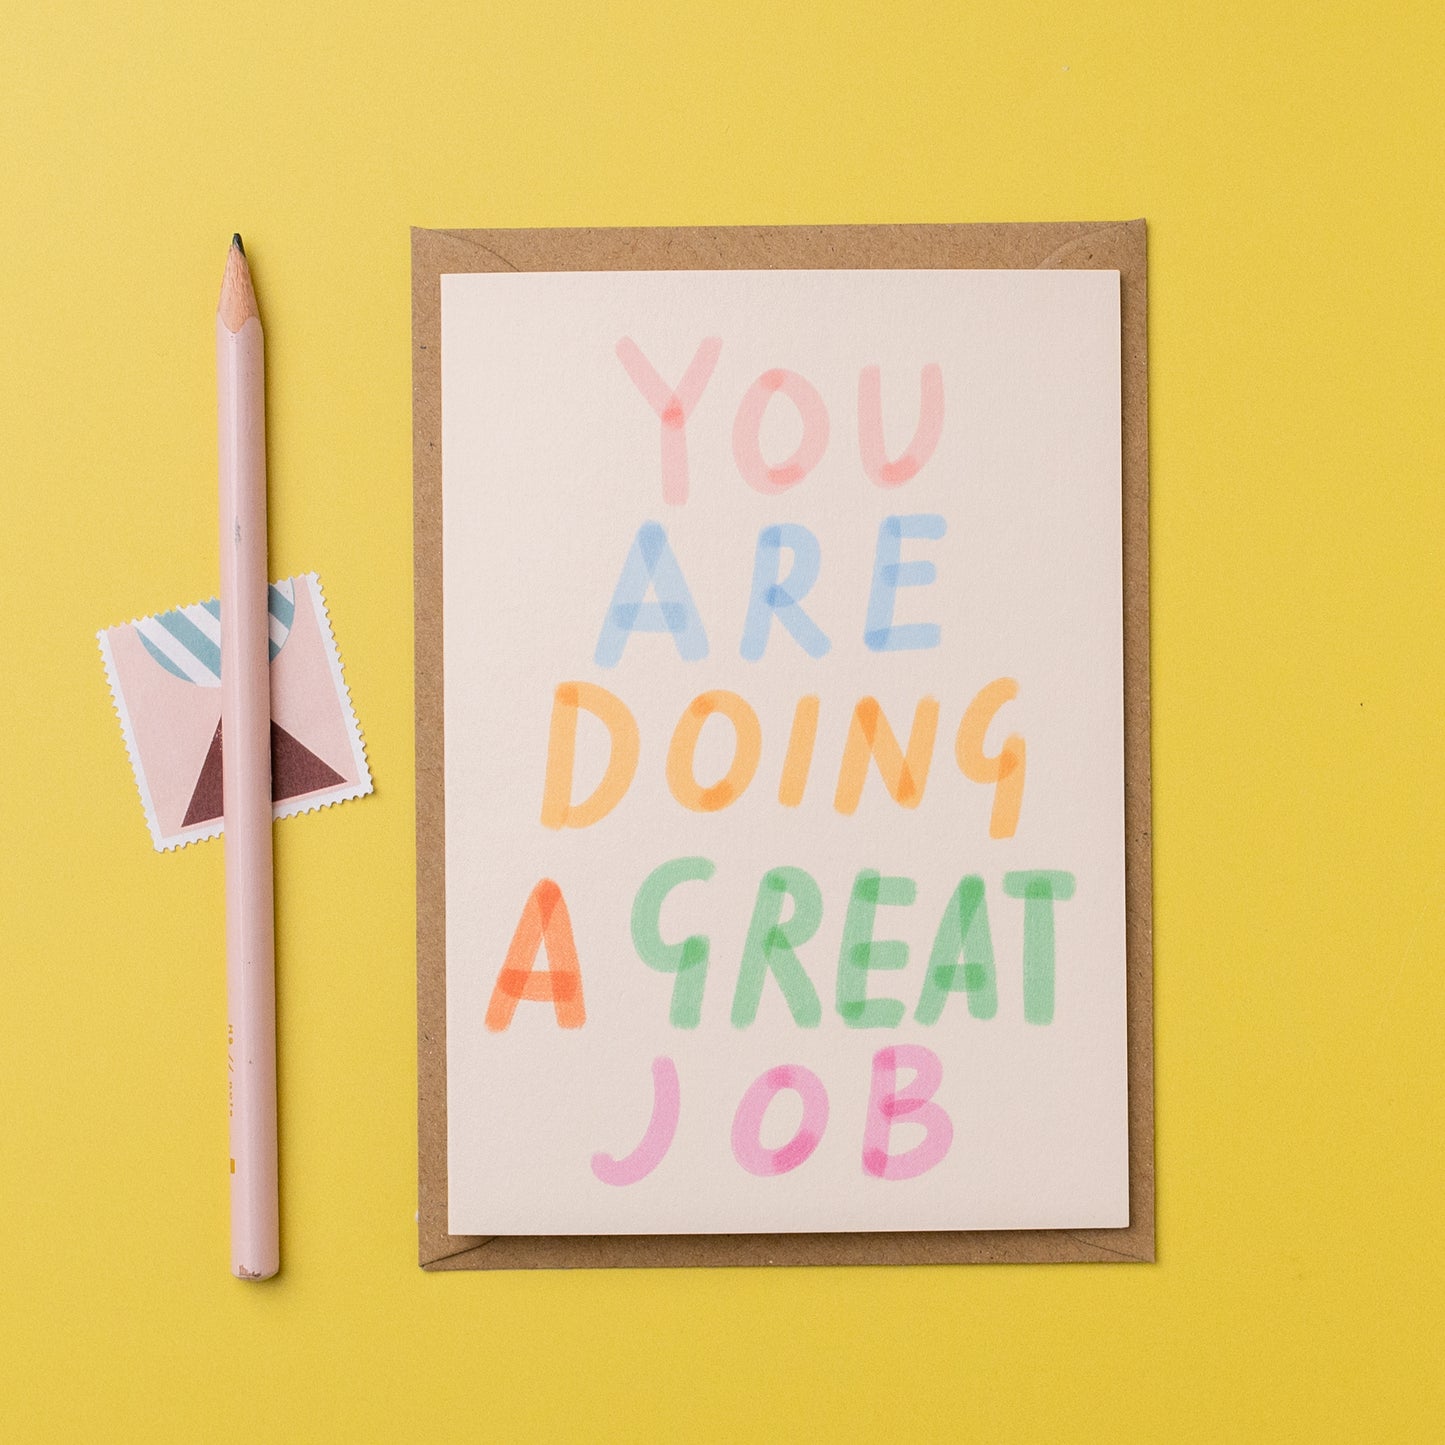 You are doing a great job card